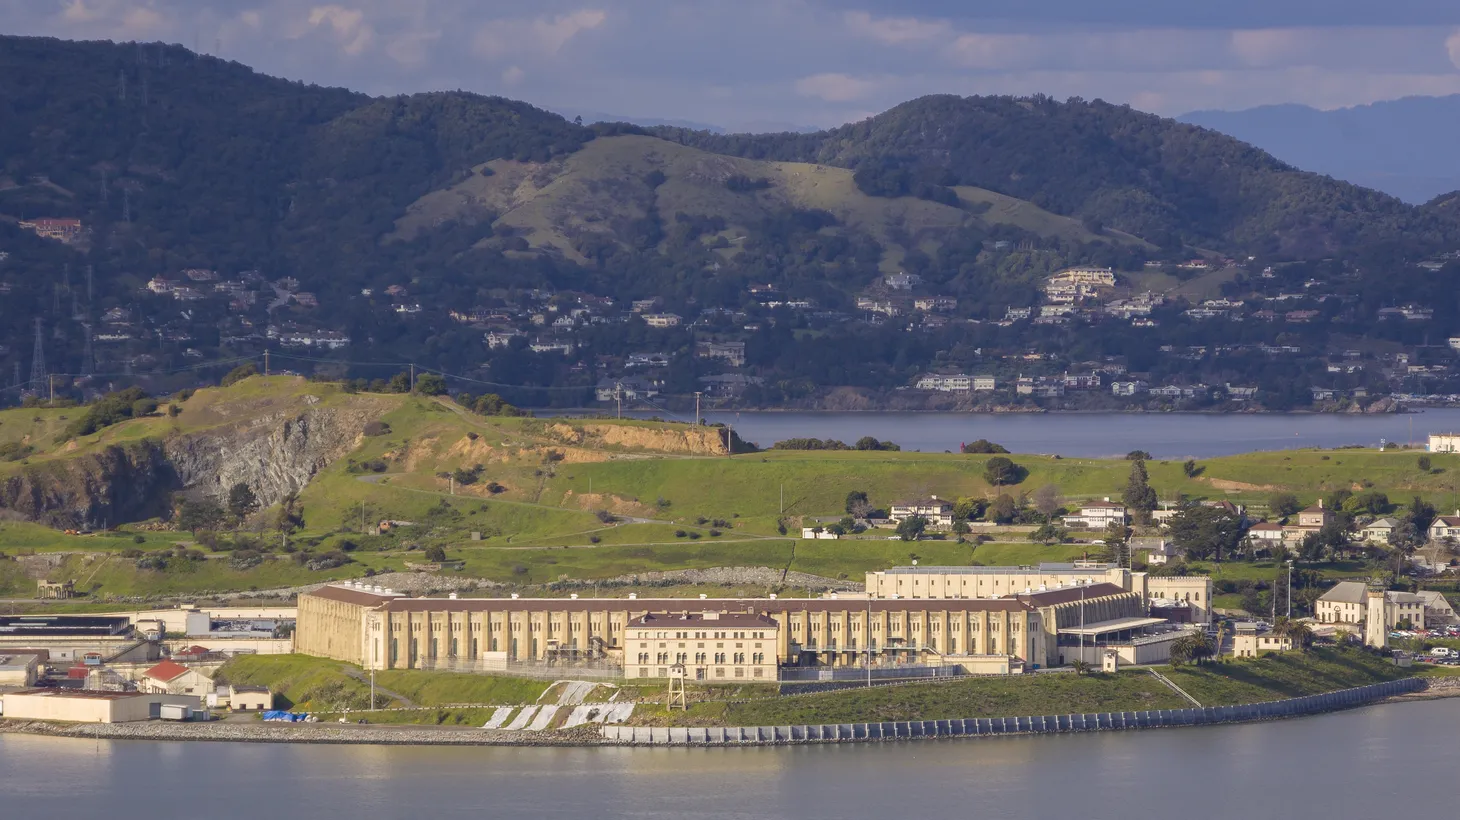 San Quentin State Prison, located in California’s Marin County, is iconic nationwide.